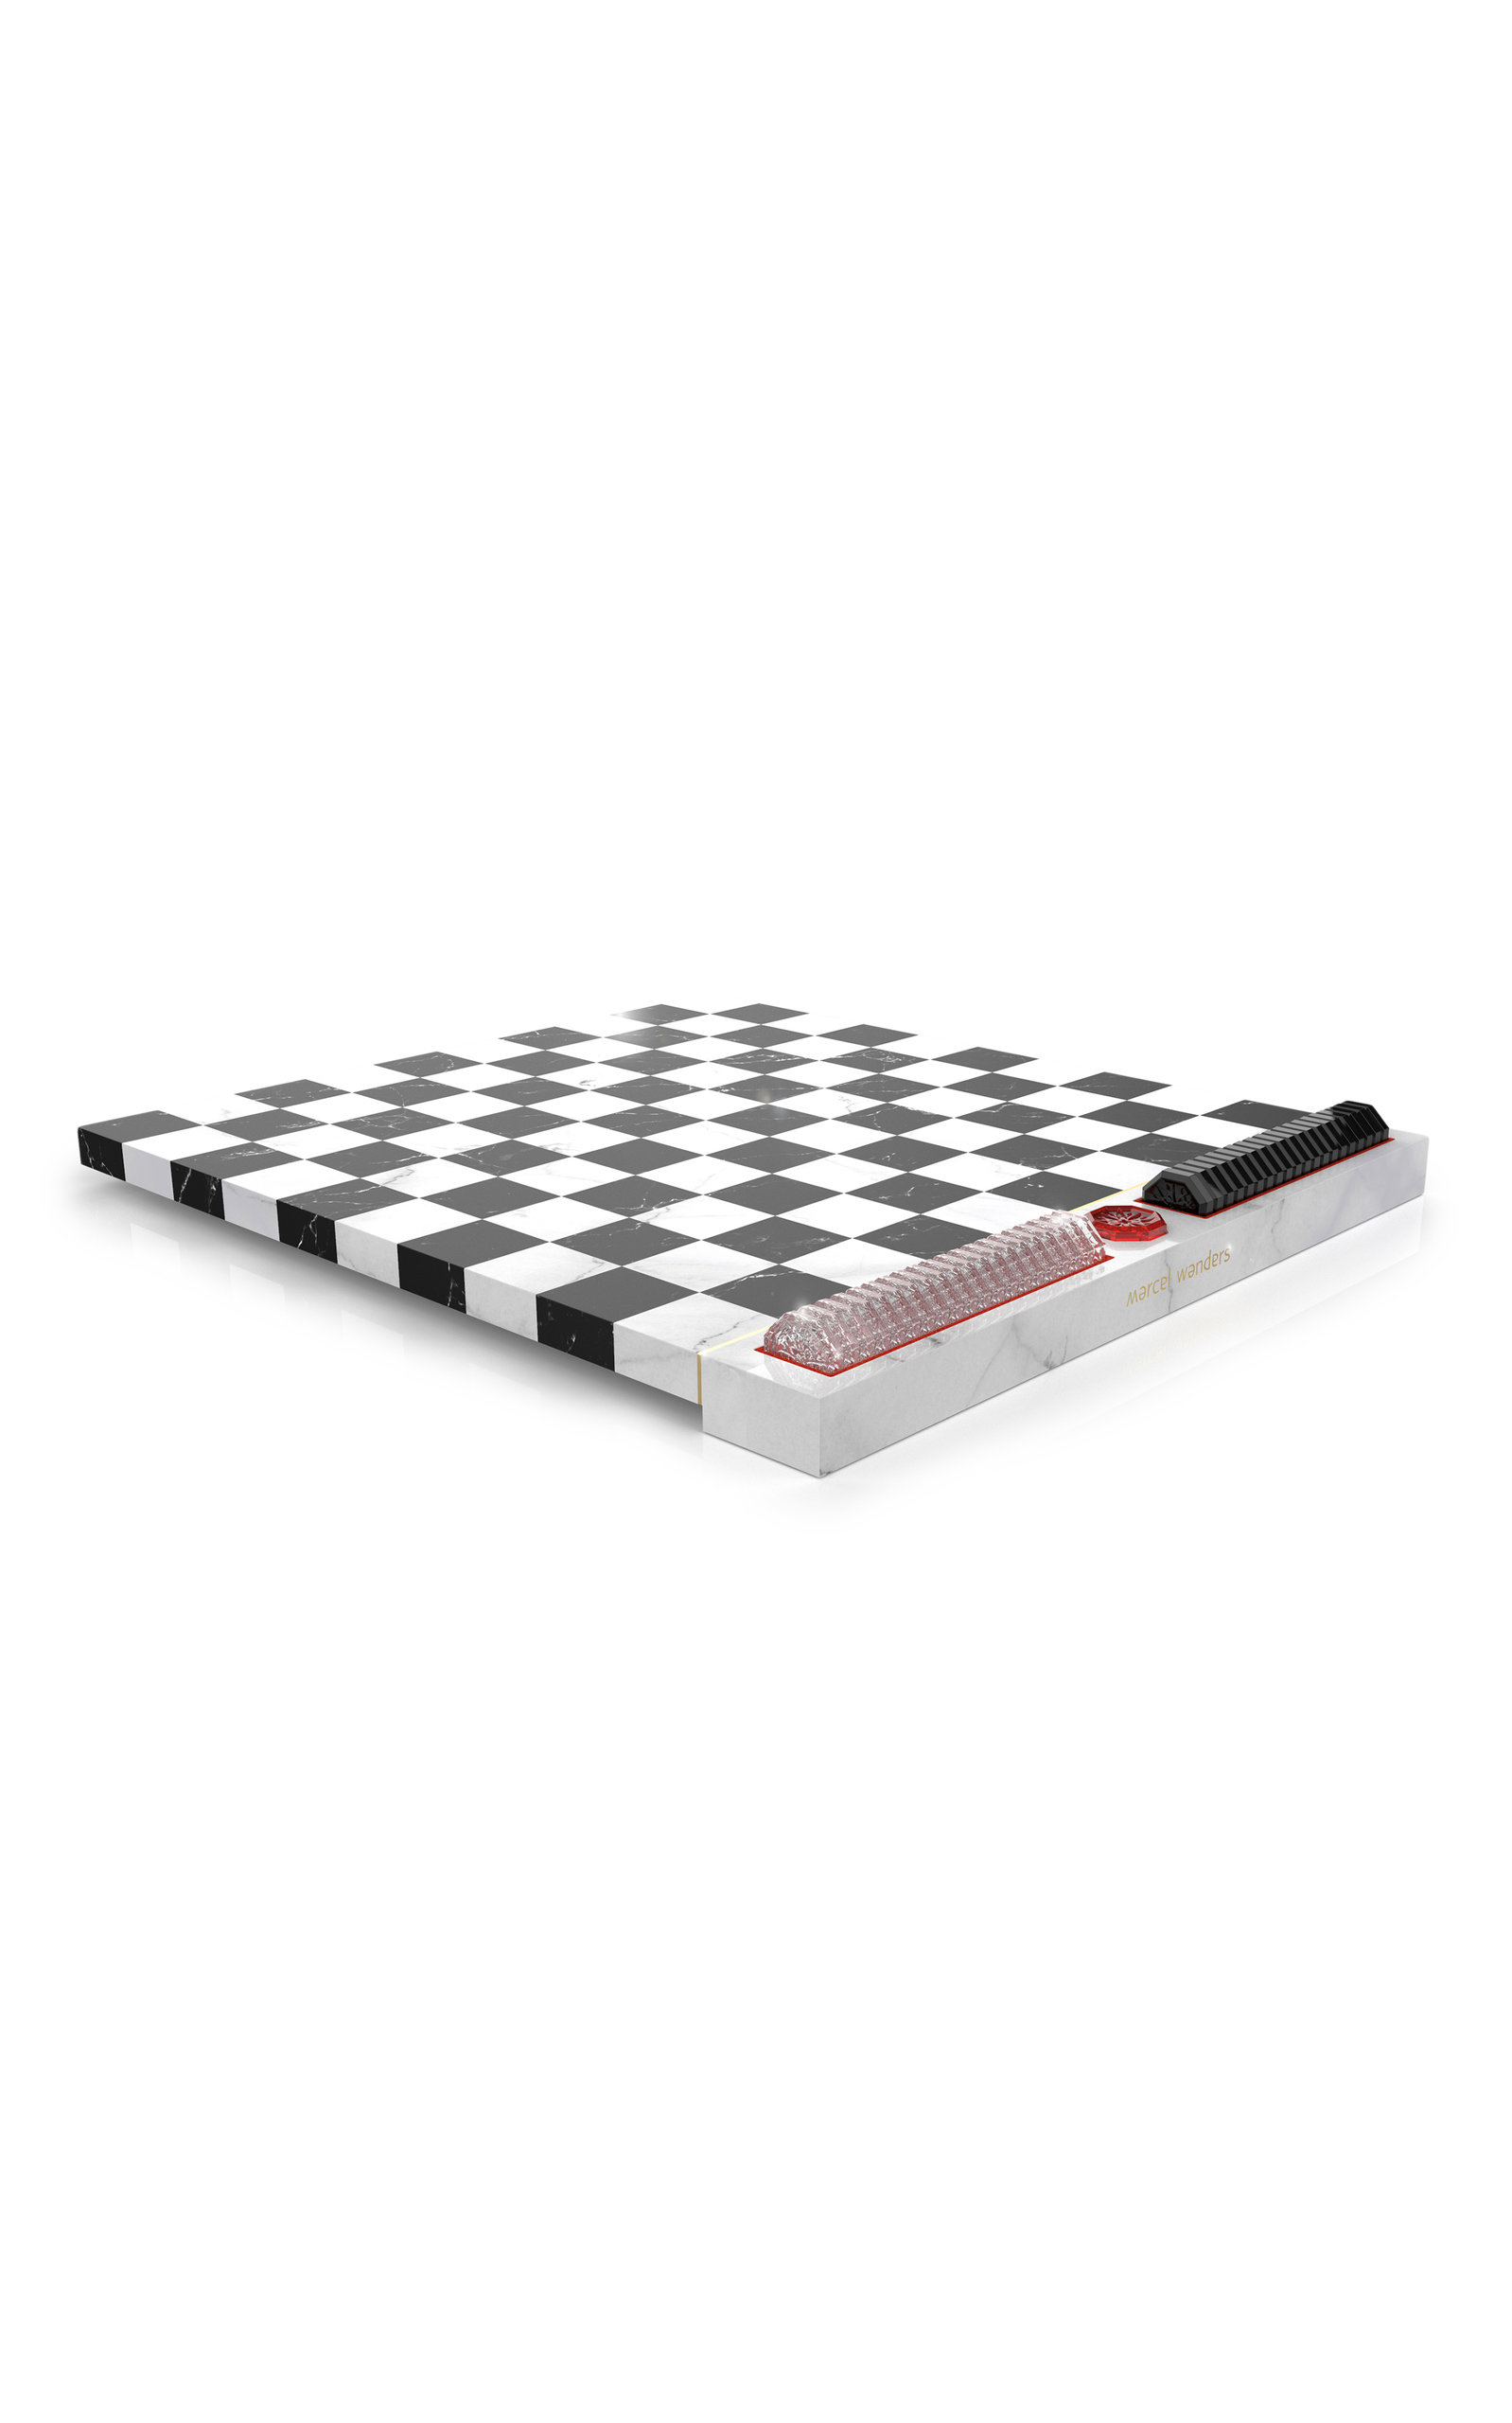 marble checkers